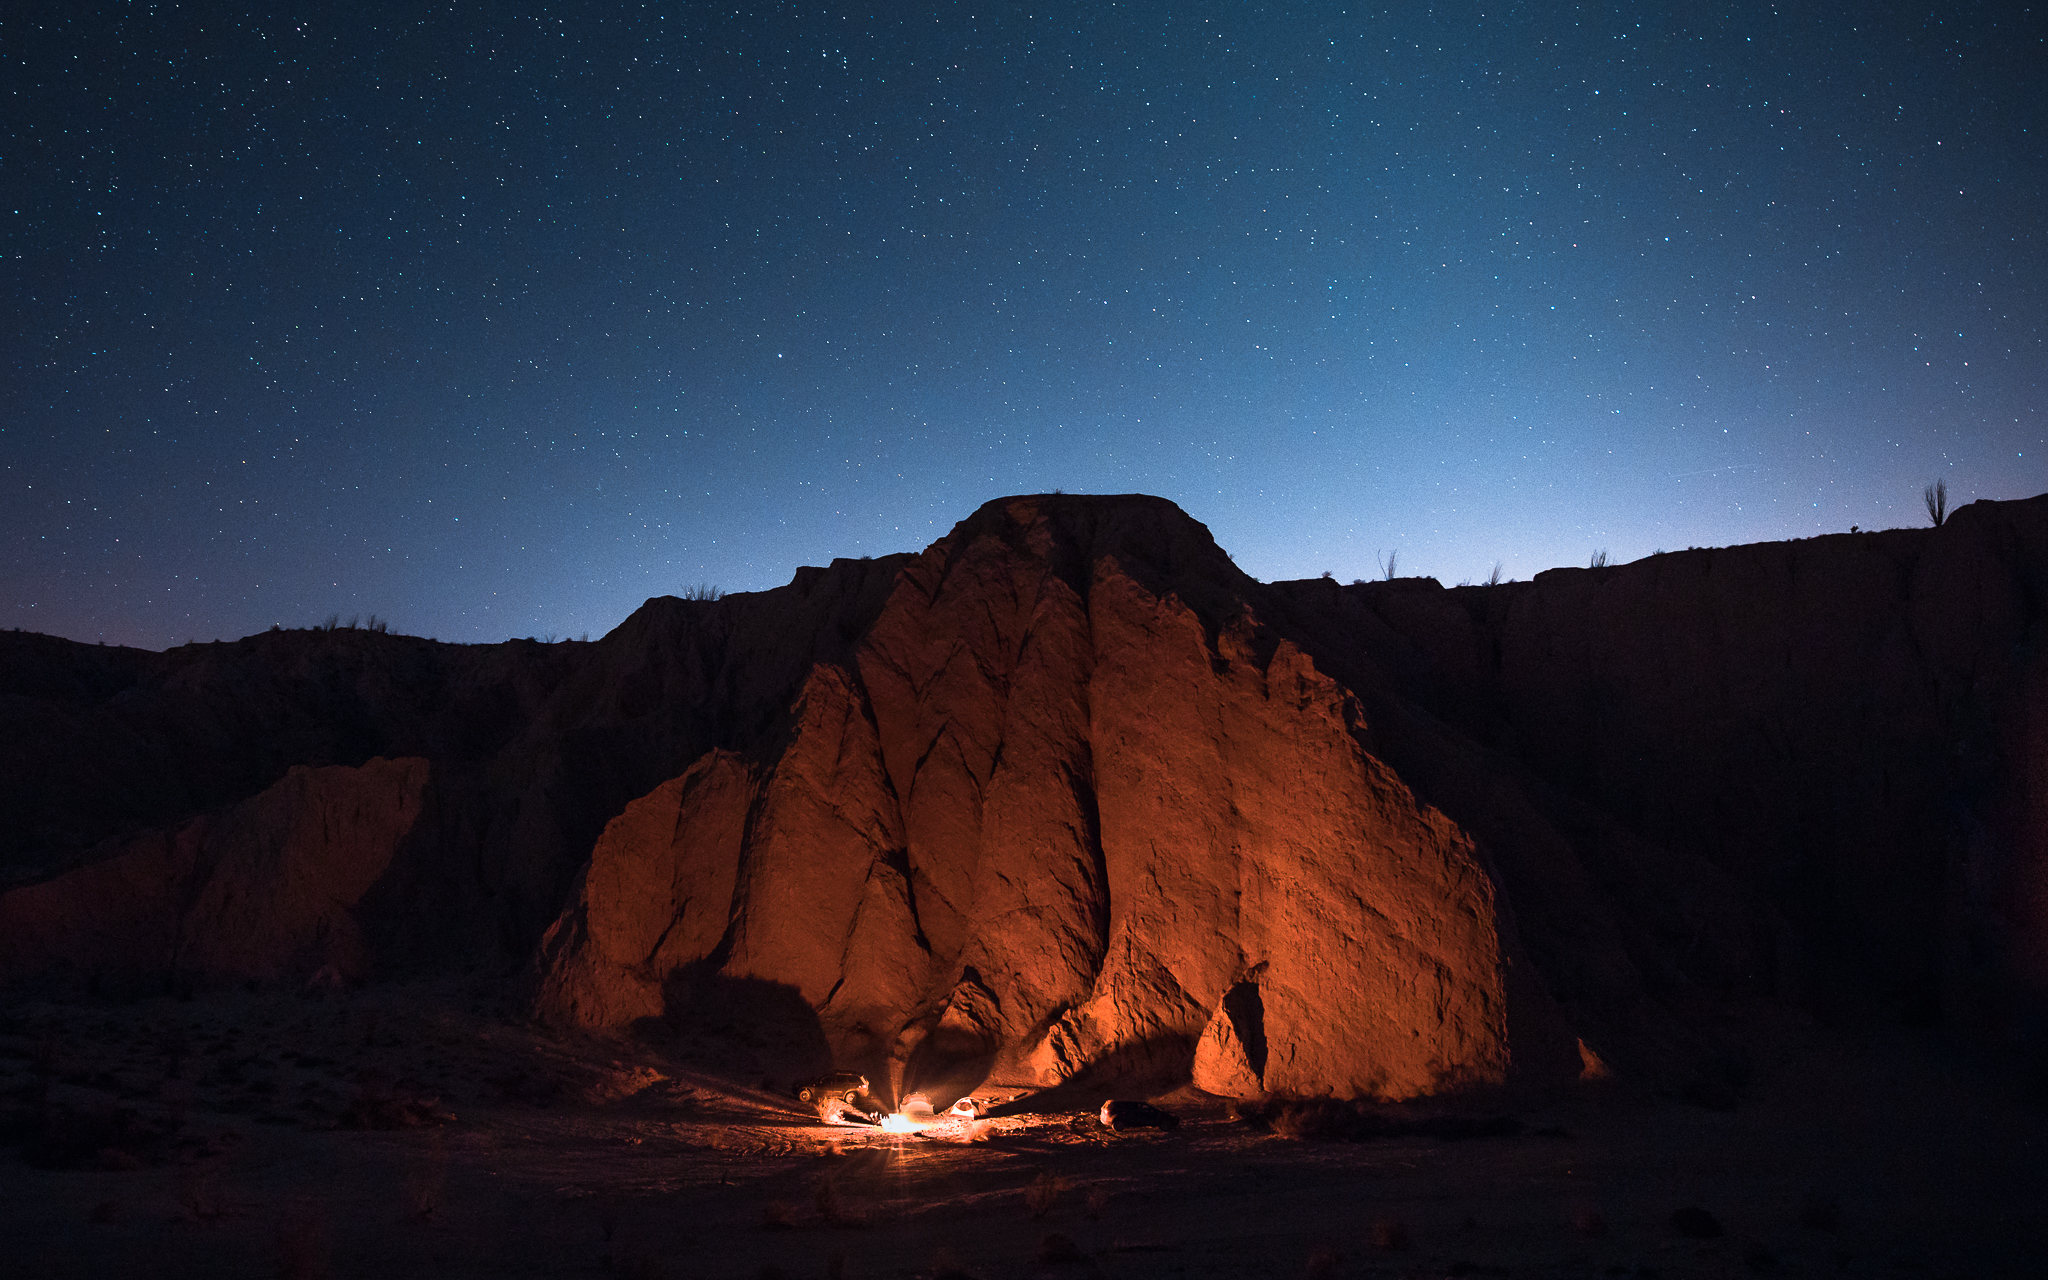 Campers enjoy a fire and stargaze at Anza-Borrego Desert State Park